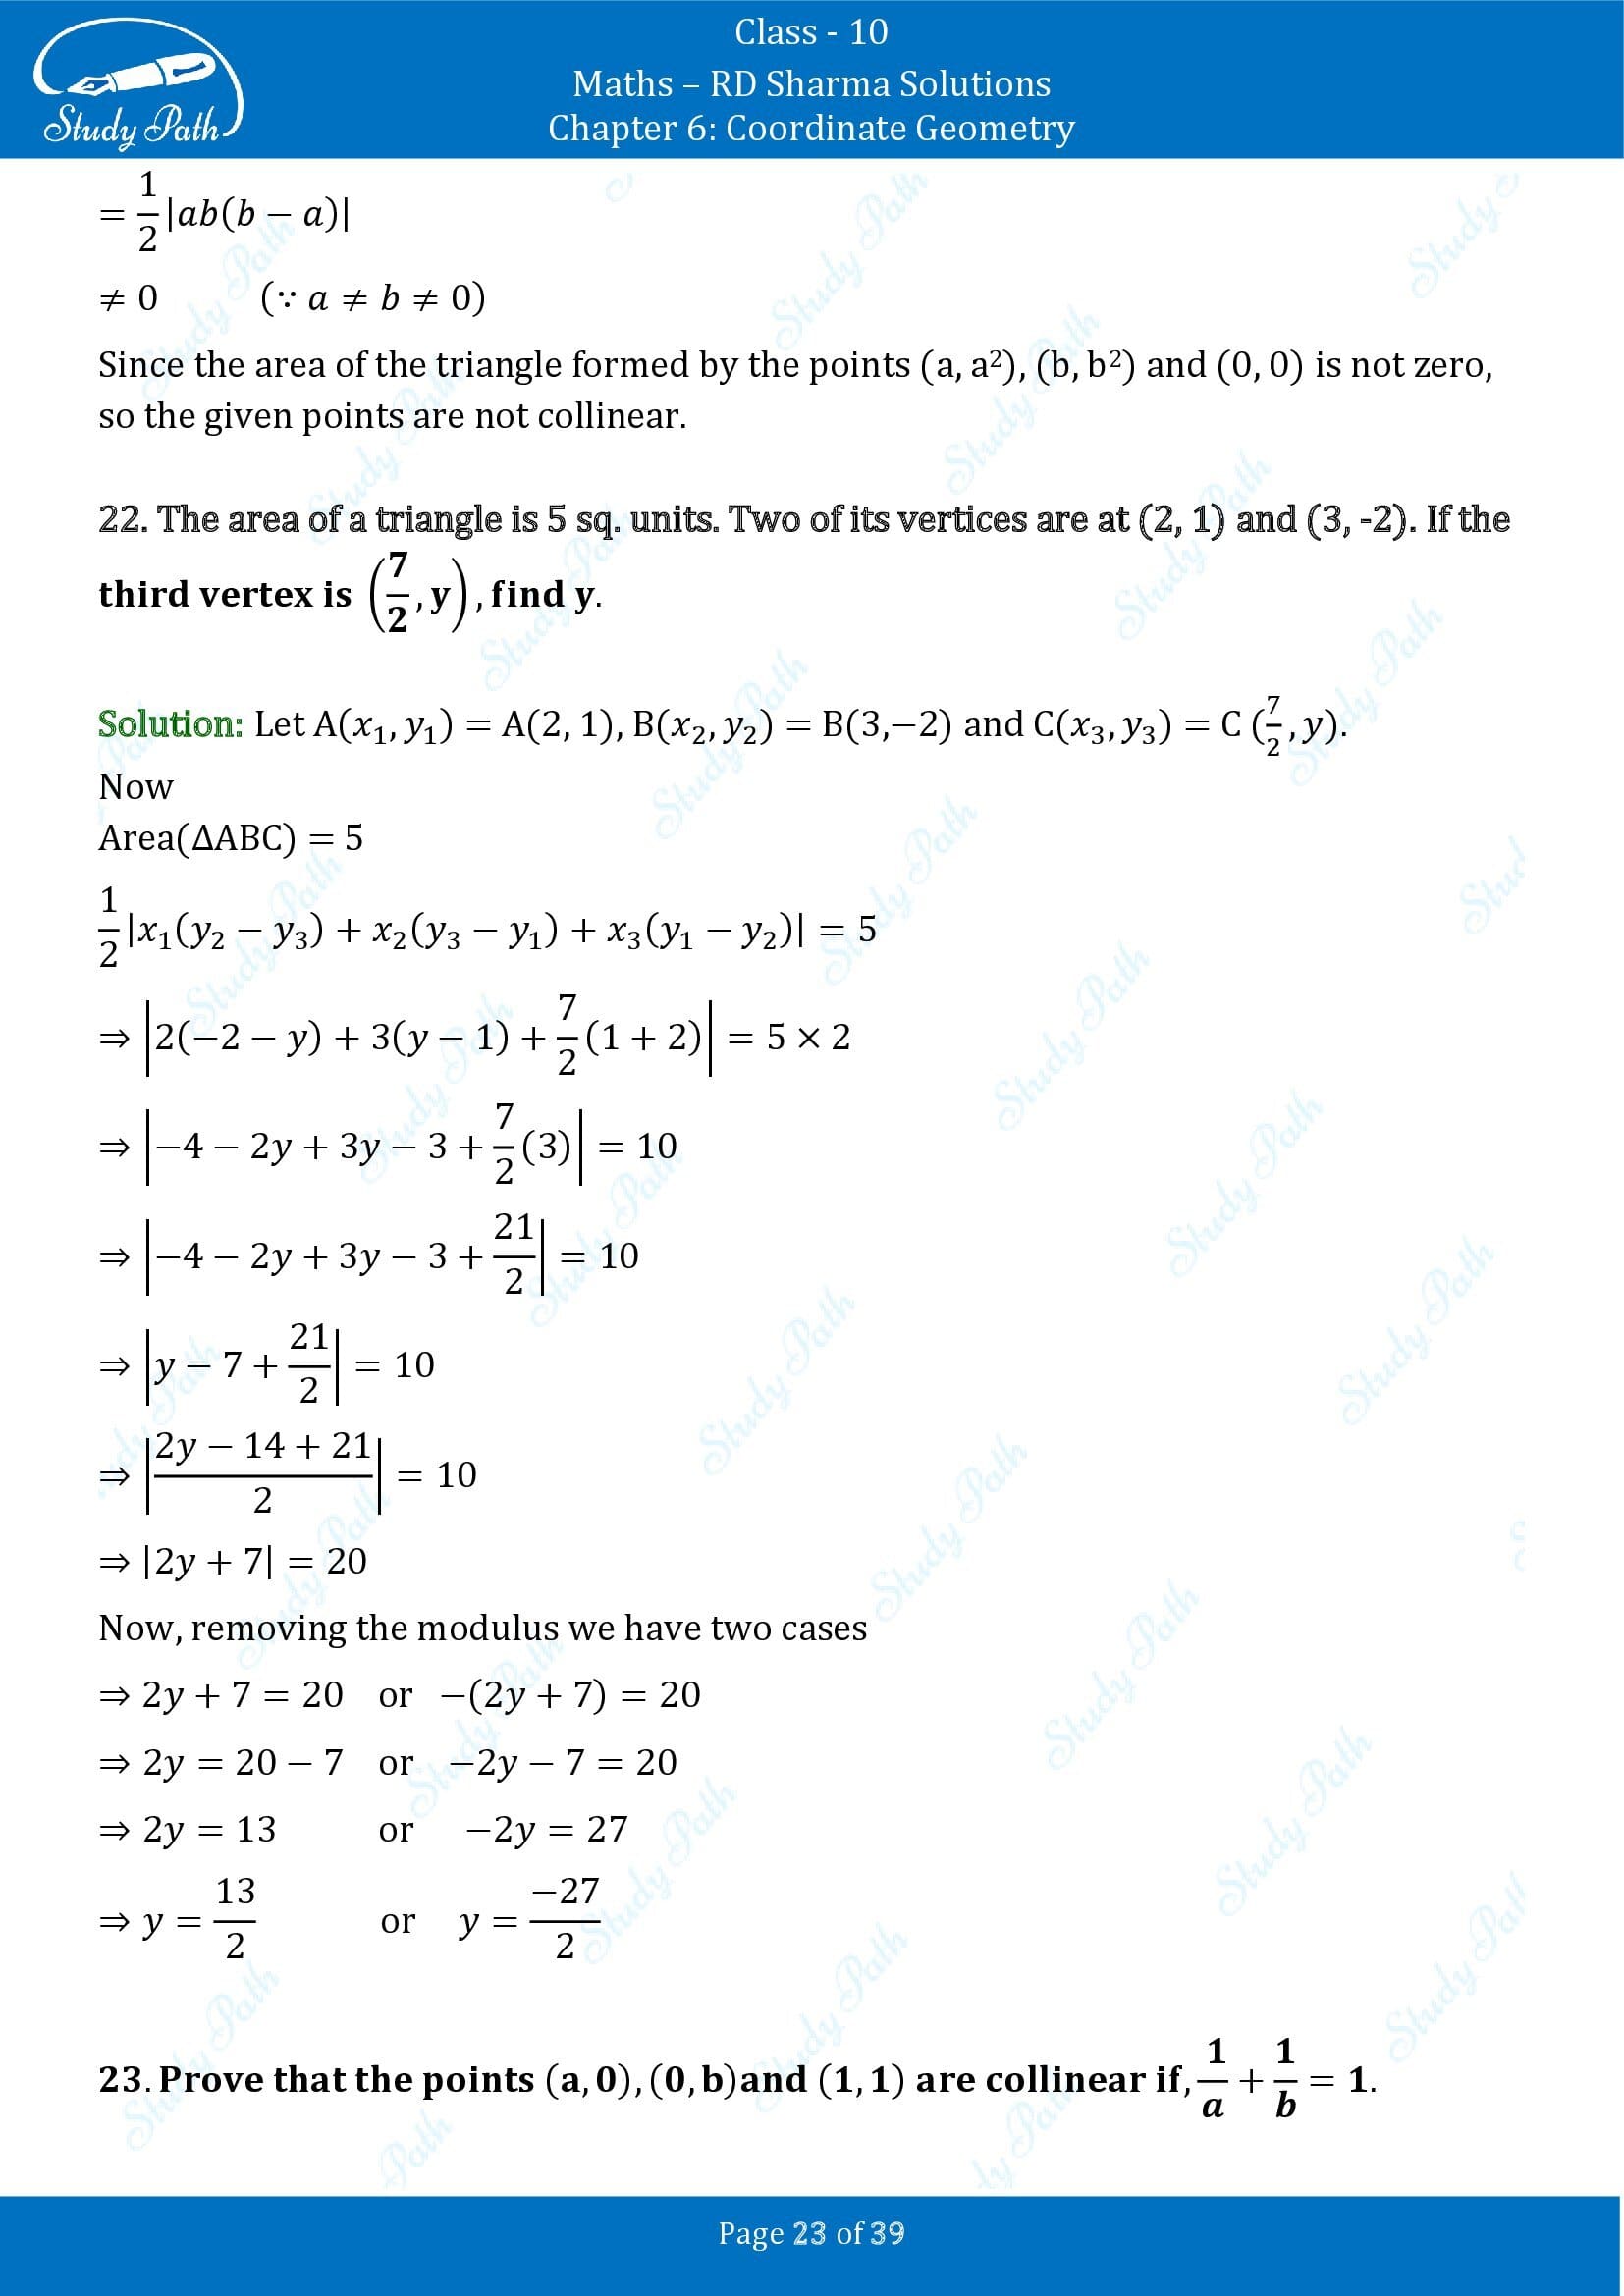 RD Sharma Solutions Class 10 Chapter 6 Coordinate Geometry Exercise 6.5 0023